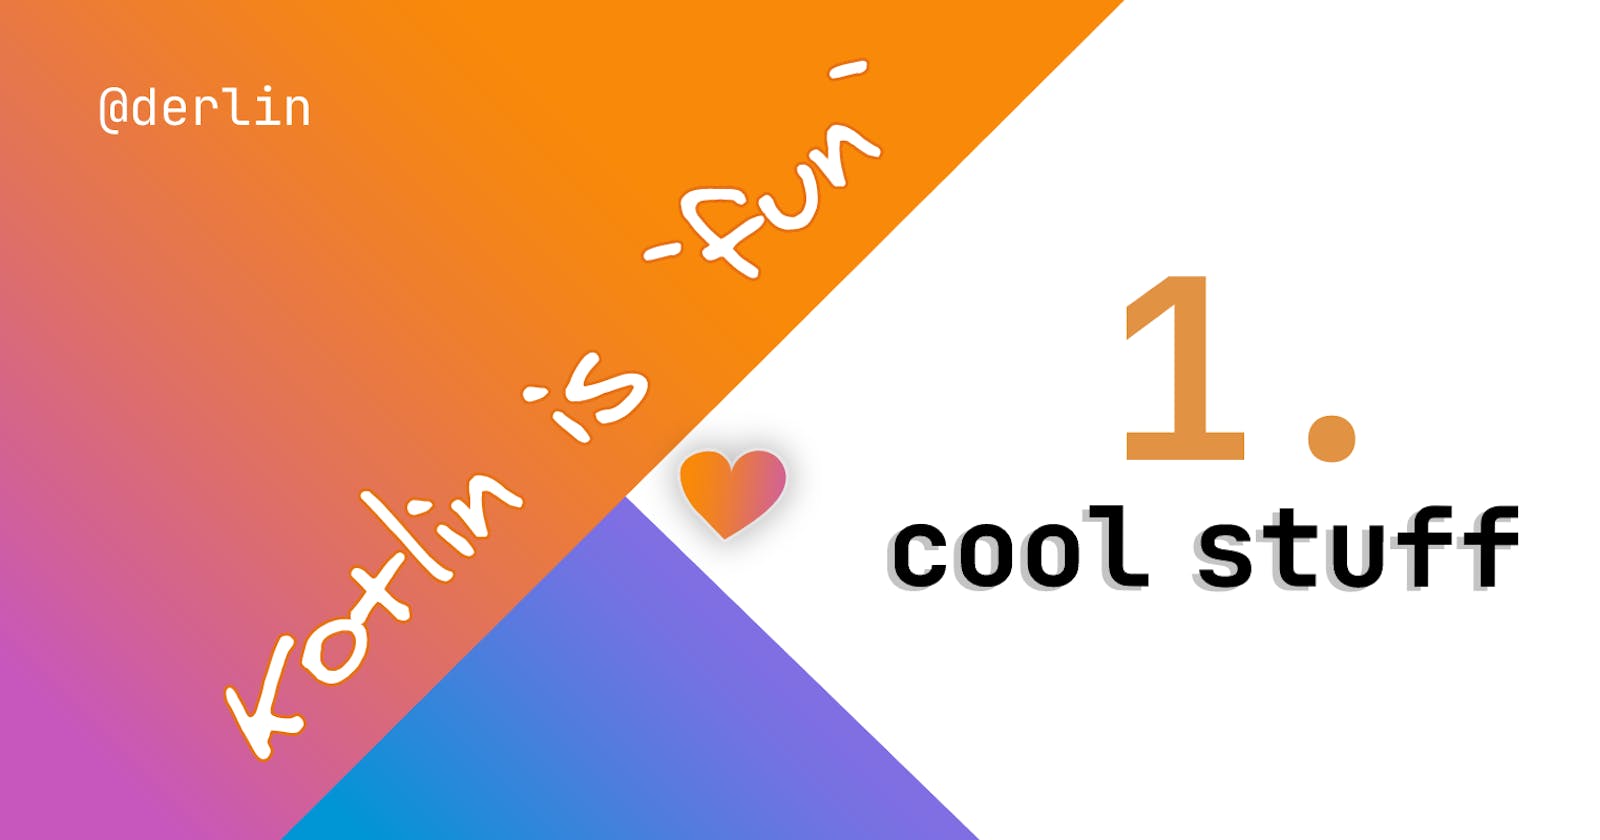 Kotlin is `fun` - Some cool stuff about Kotlin functions